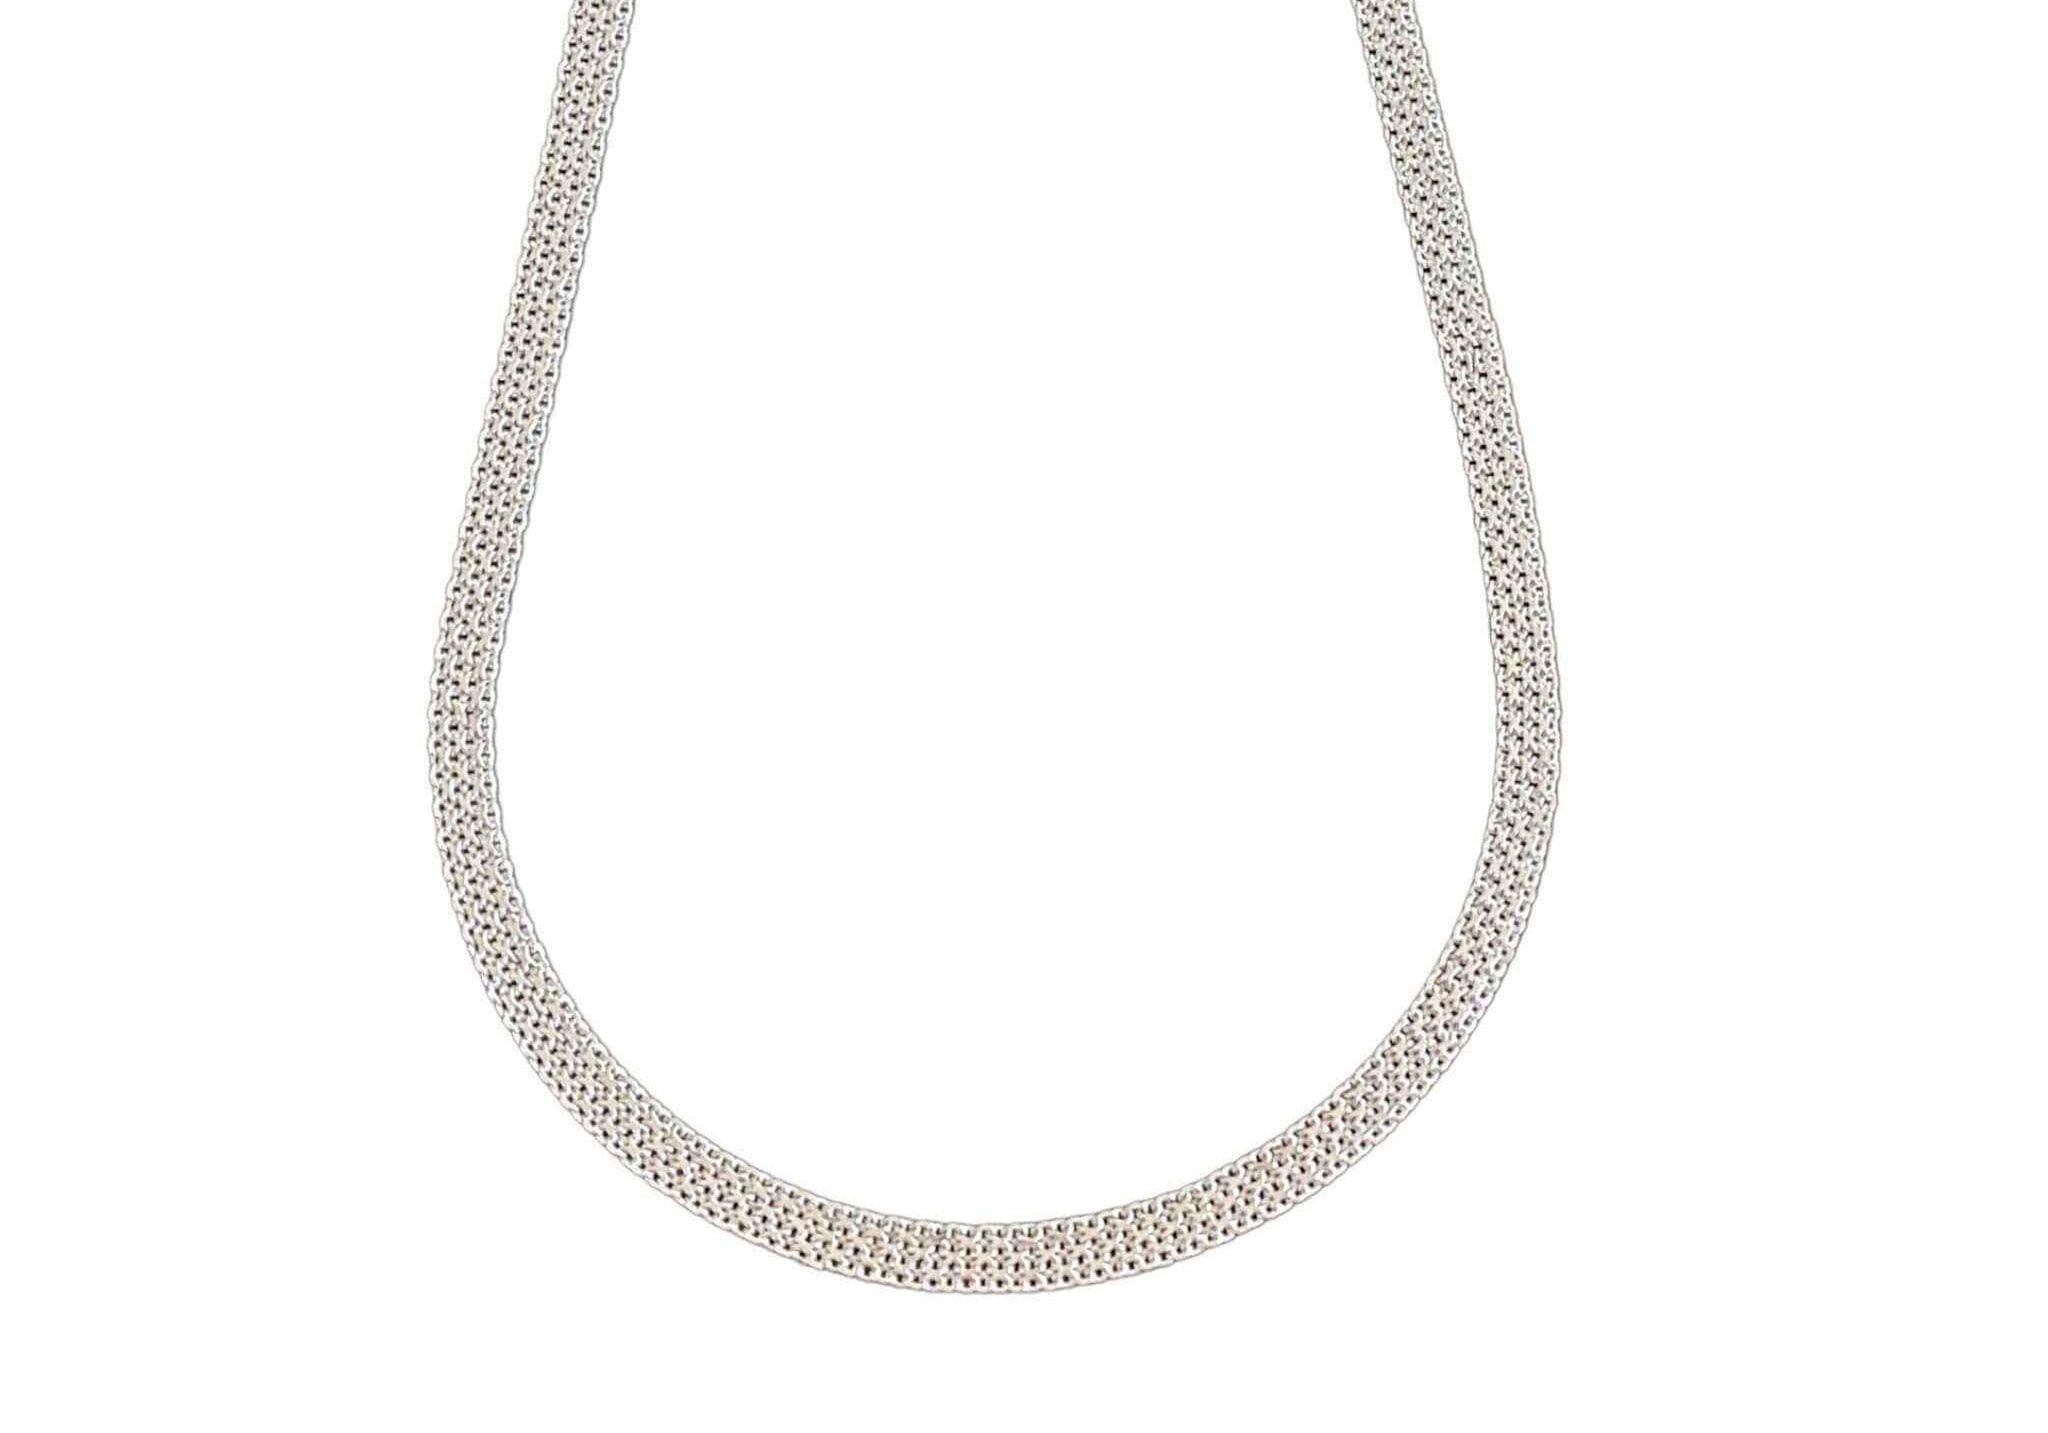 Timeless Silver Mesh Choker Necklace for Women by Alessandra James.